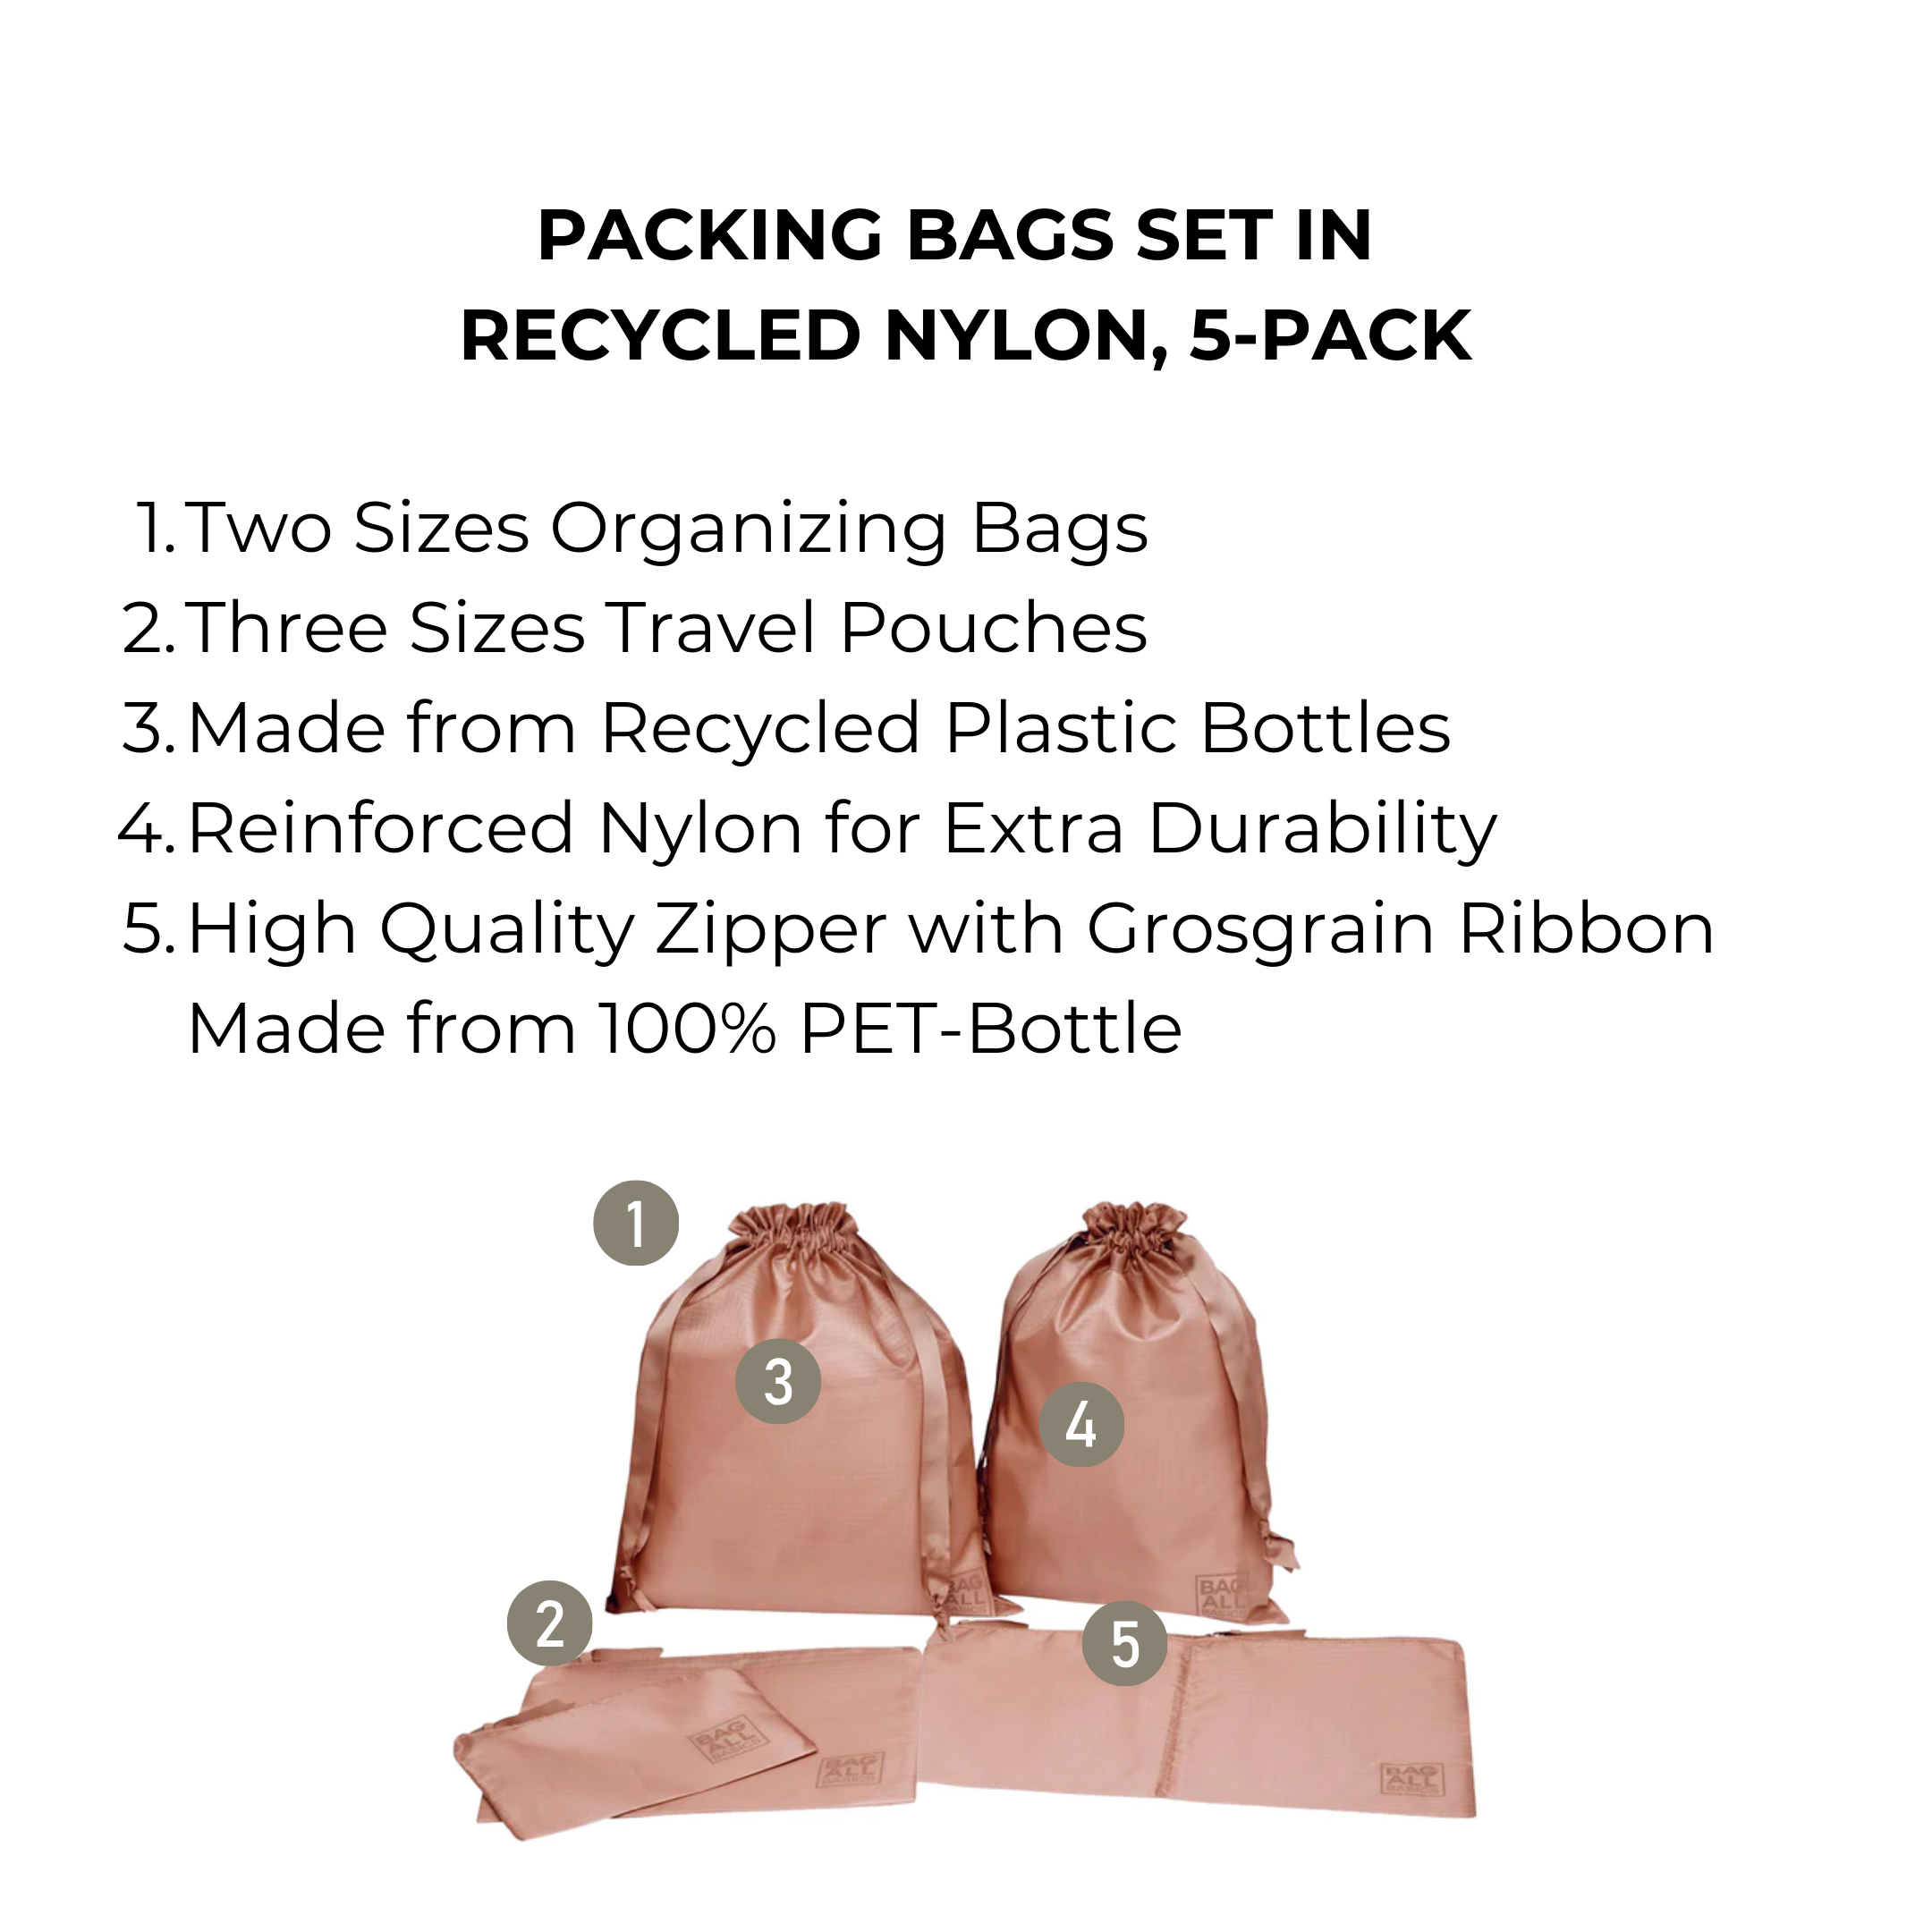 Packing Bags Set in Recycled Nylon, 5-pack, Pink/Blush | Bag-all